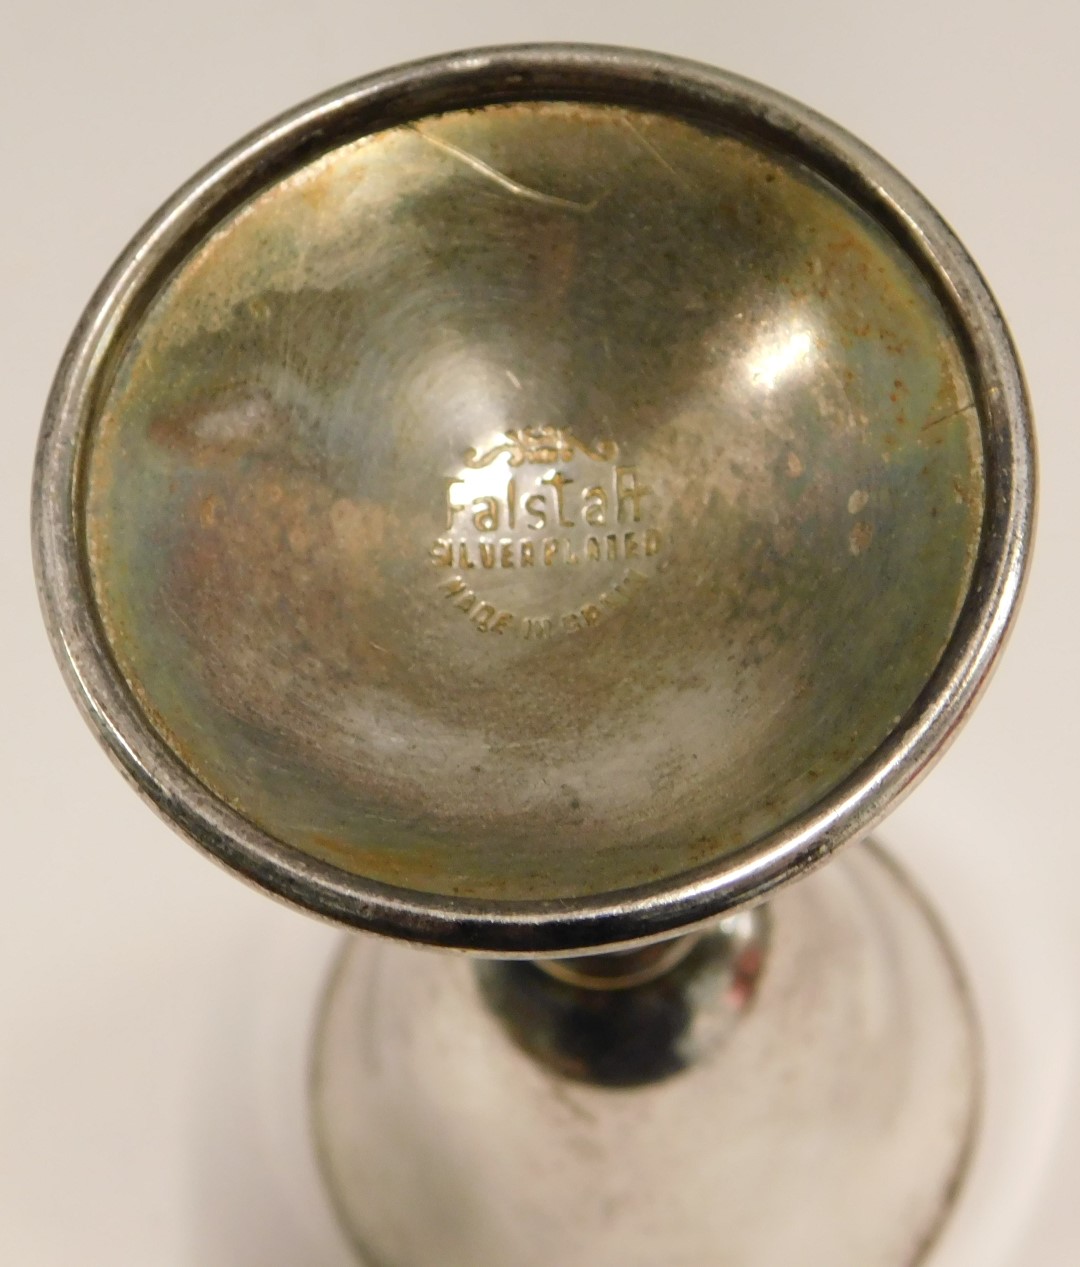 A Falstar silver plated goblet, on a twist and fielded stem, on circular foot, 11cm high. - Image 2 of 2